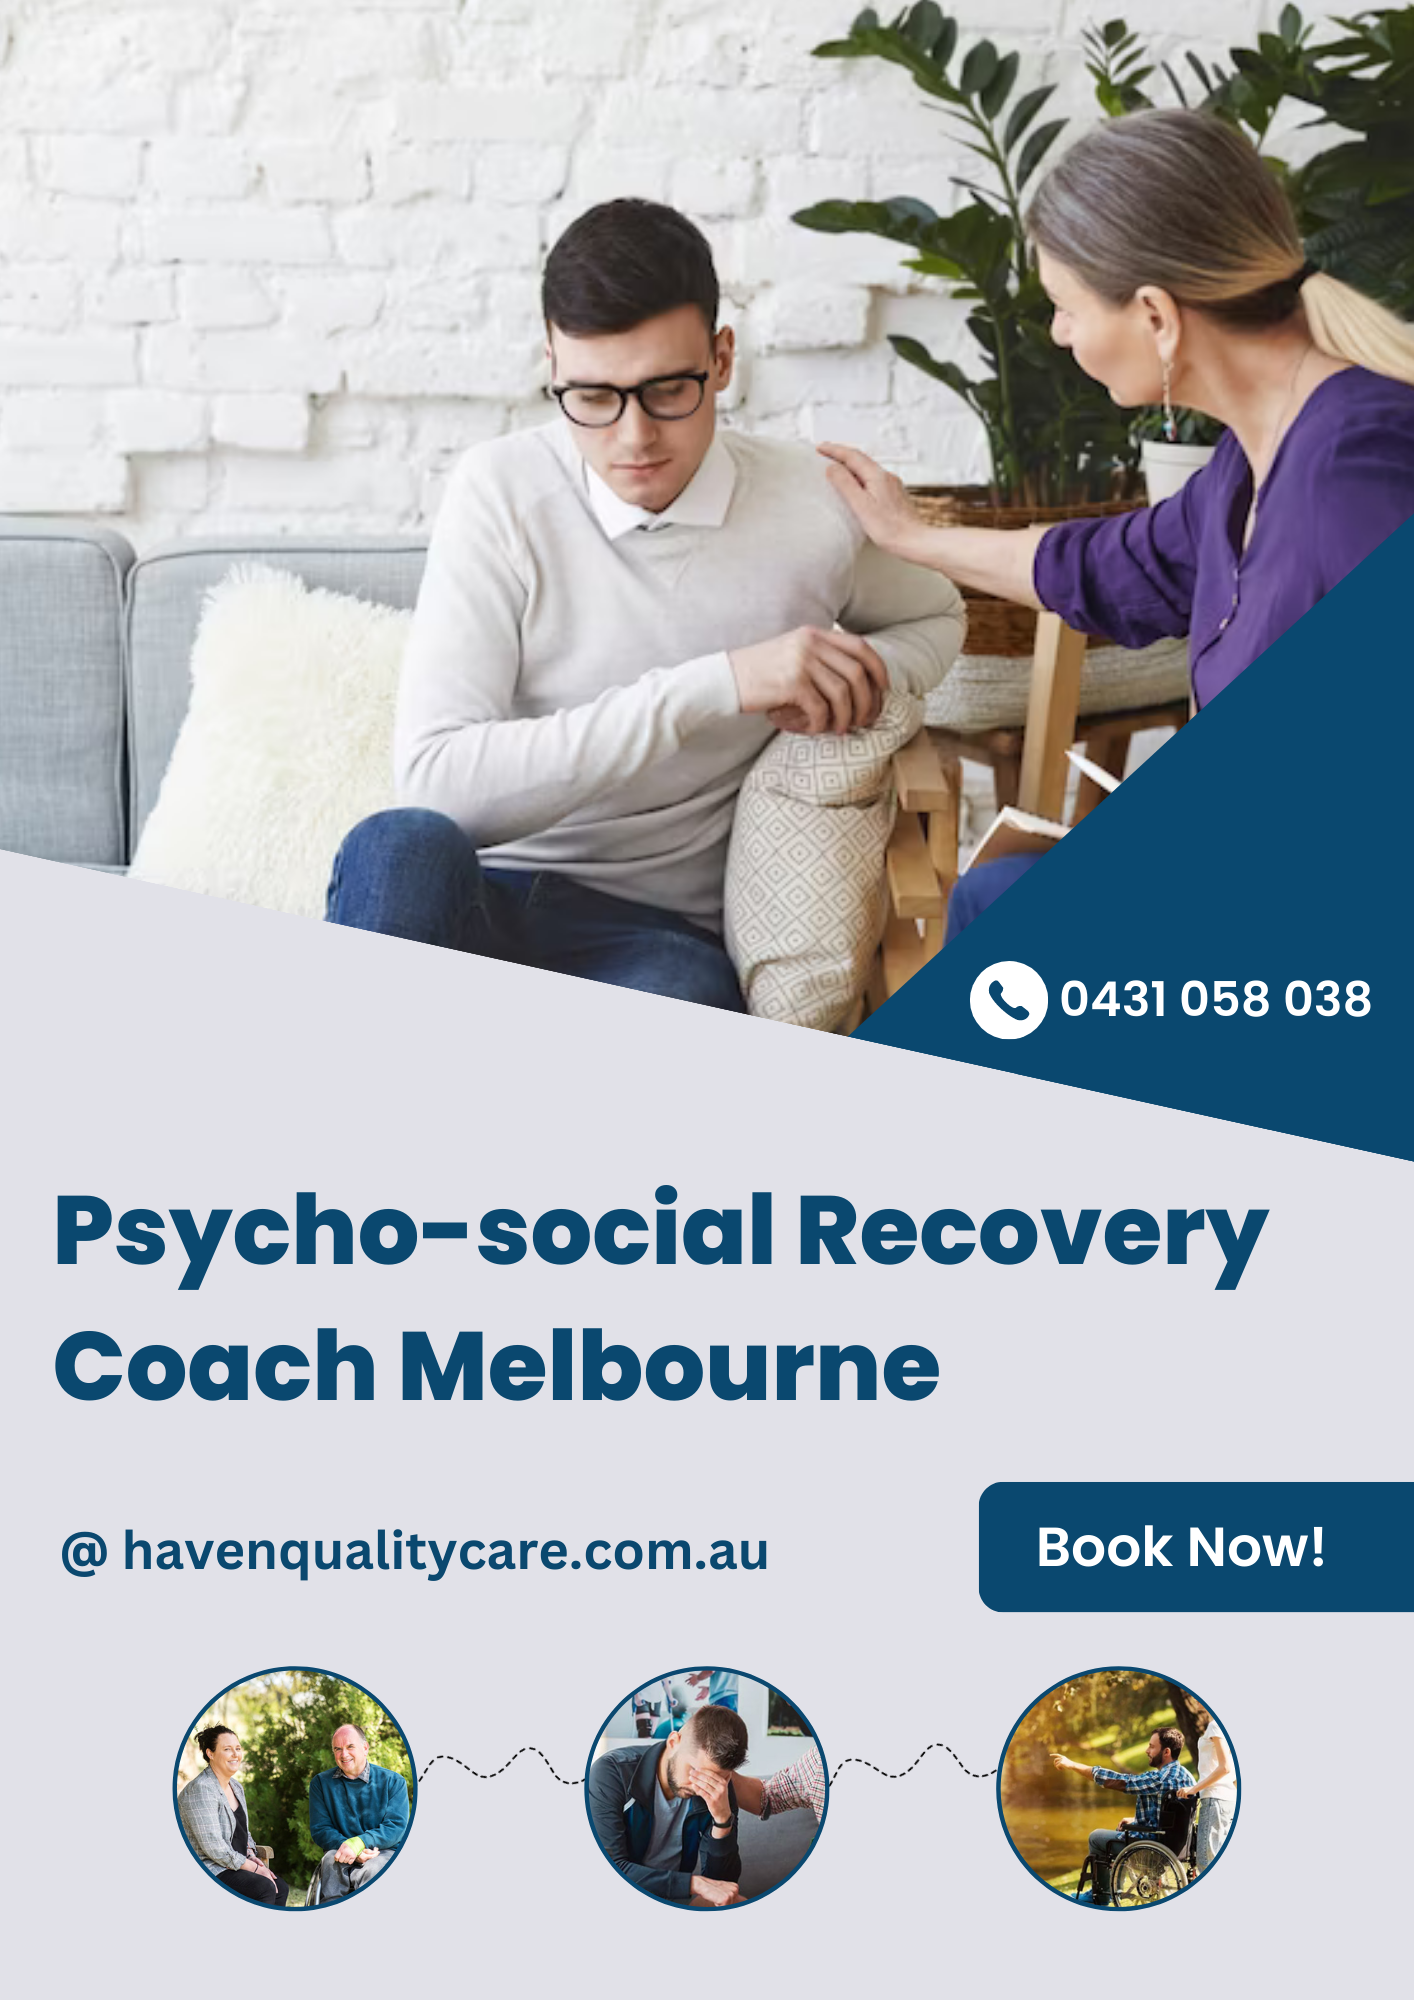 Psycho-social Recovery Coach Melbourne